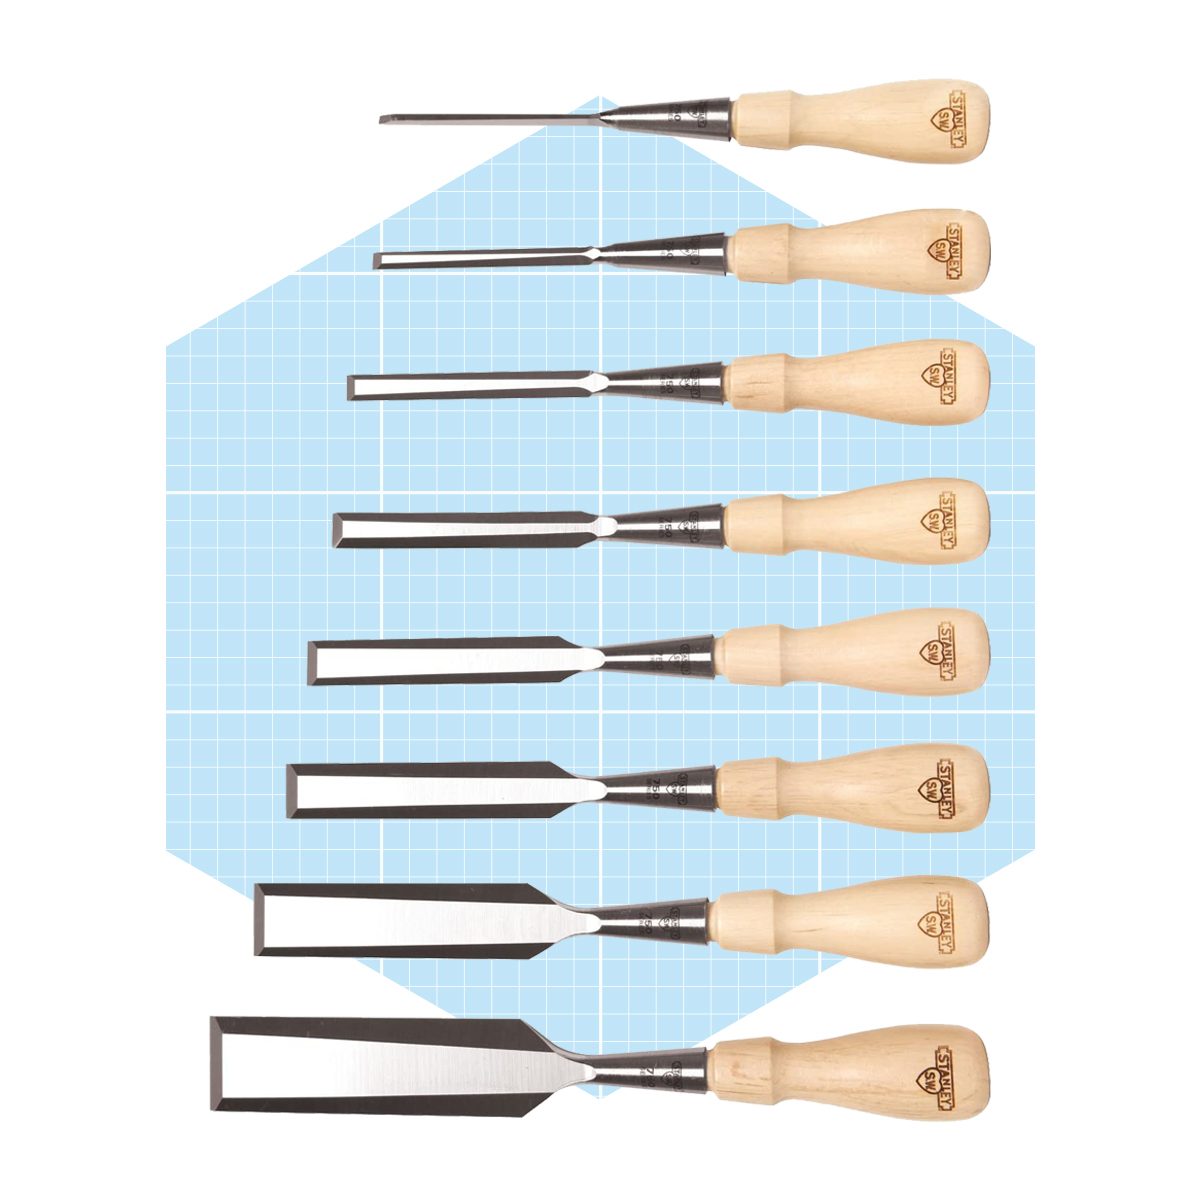 Family Handyman - 3 Types of Wood Chisels for Woodworking You Should Know